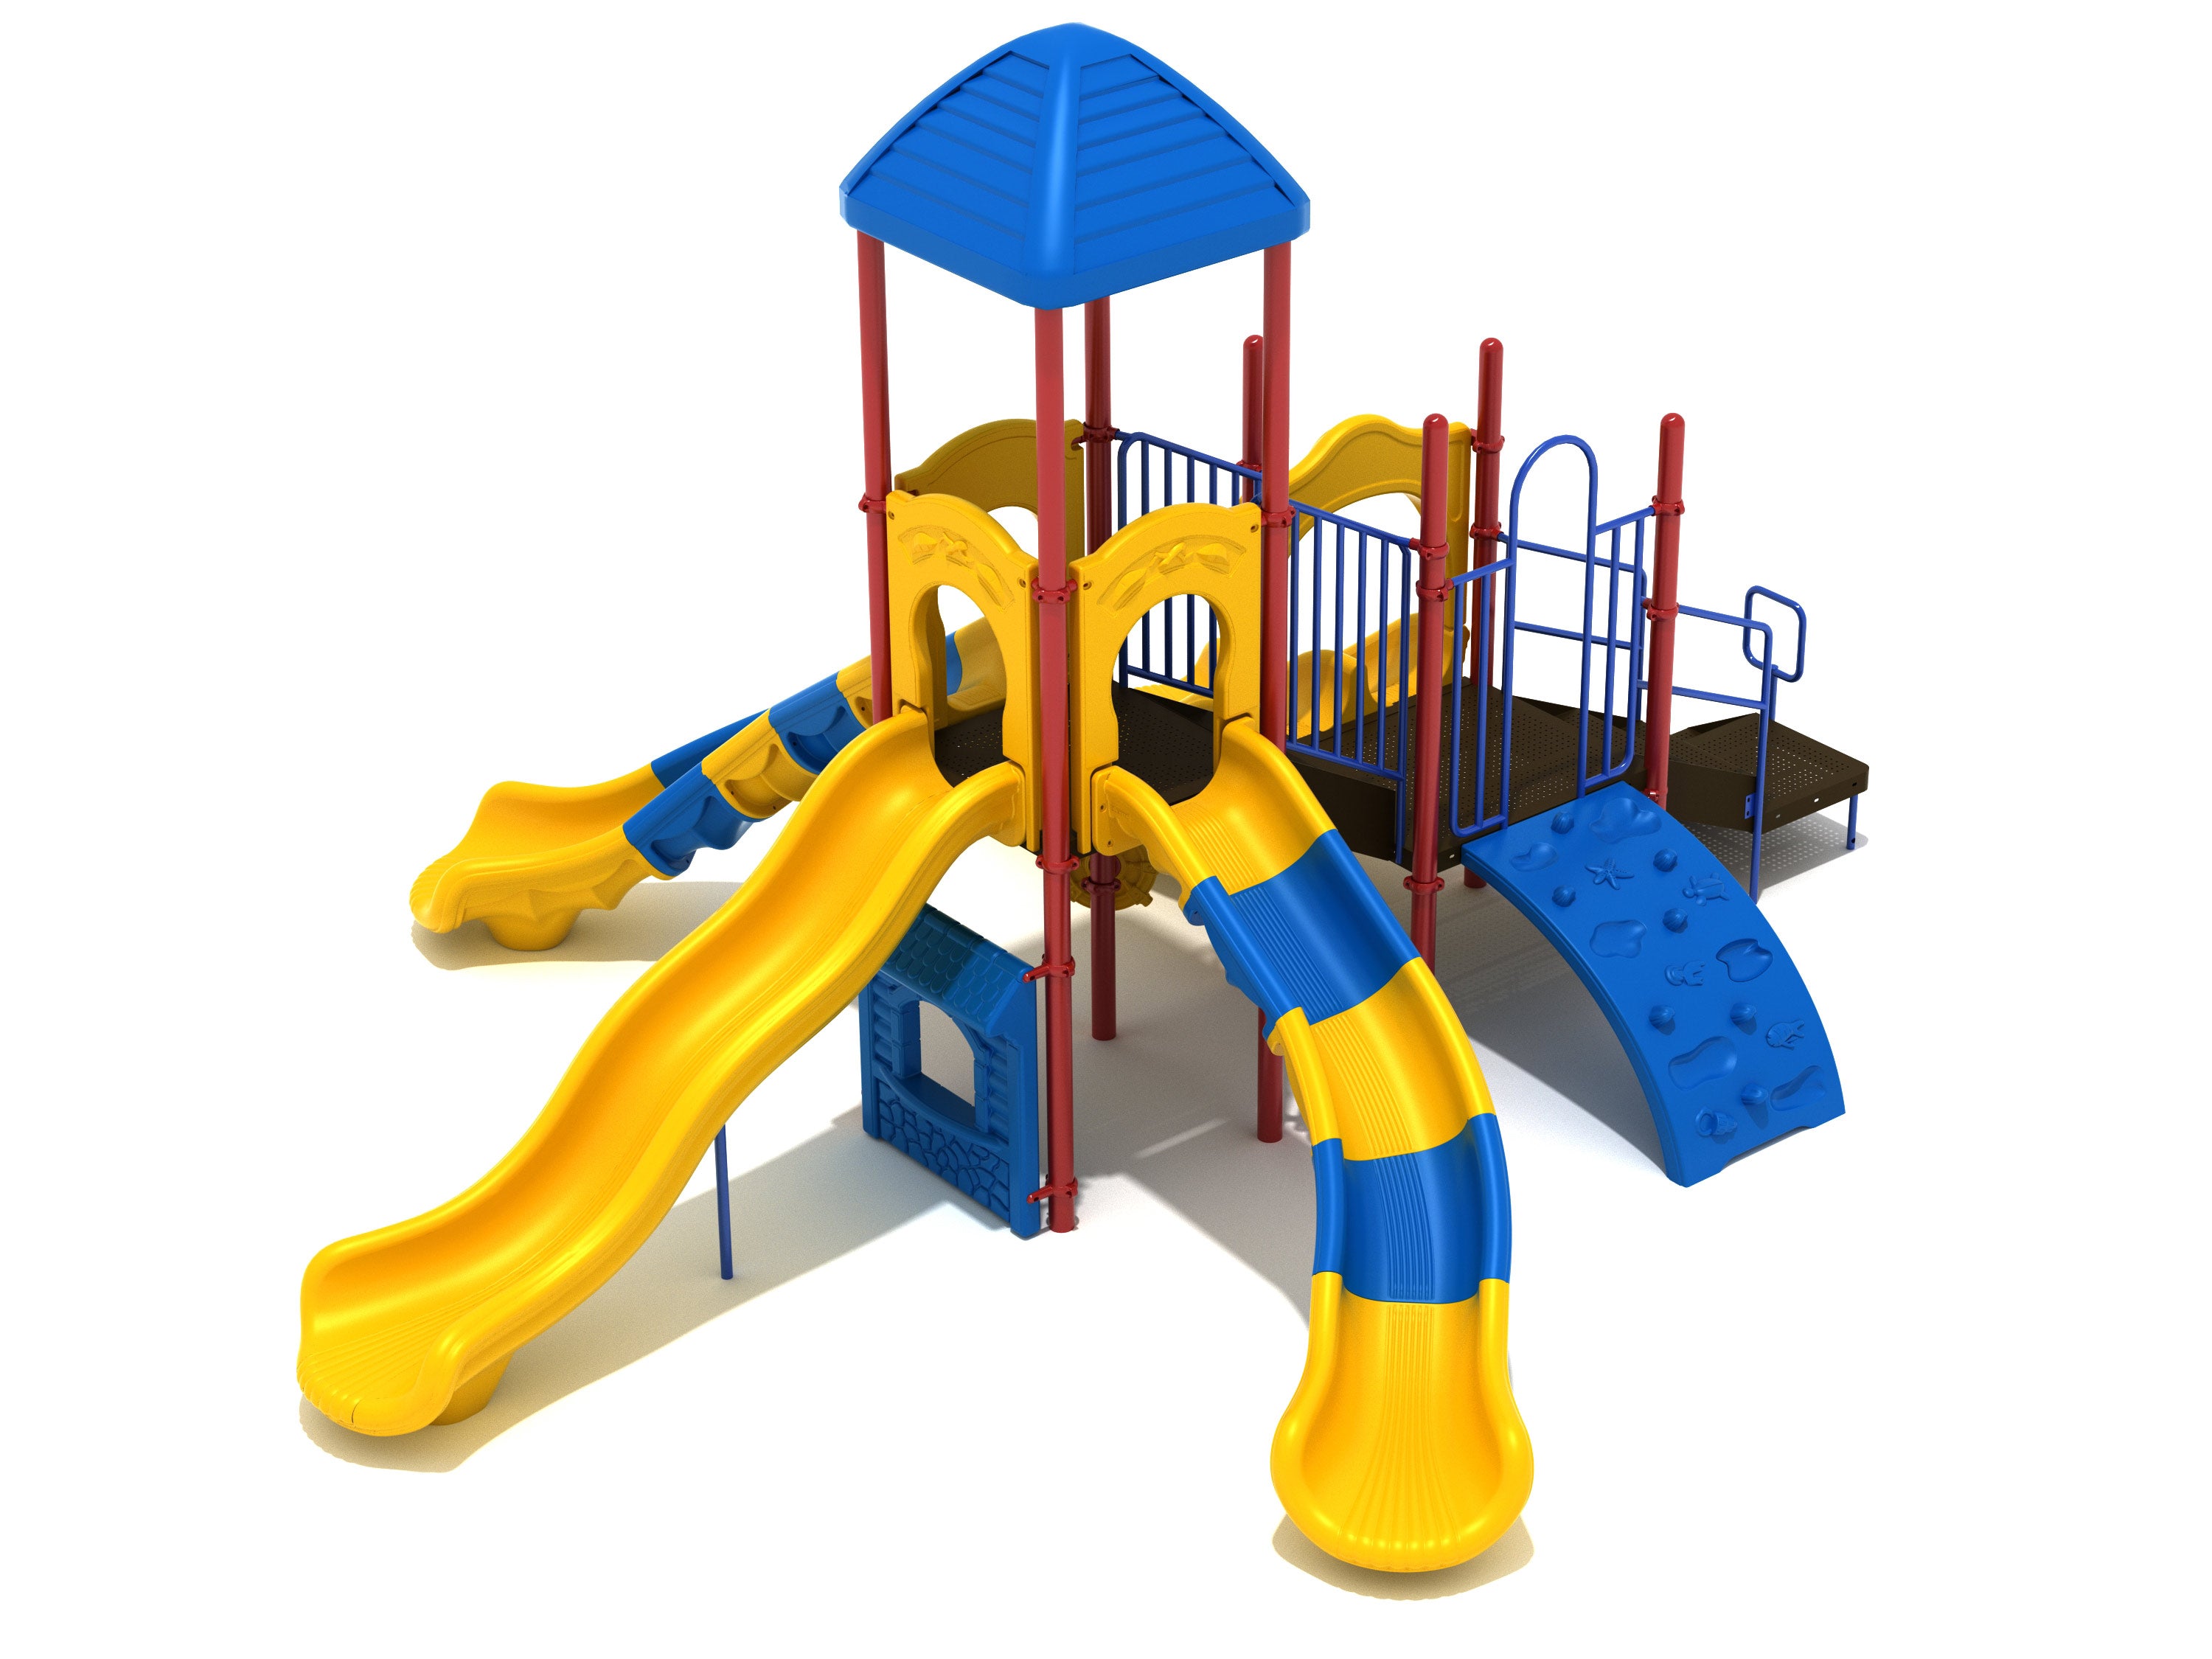 Divinity Hill Play System Primary Colors